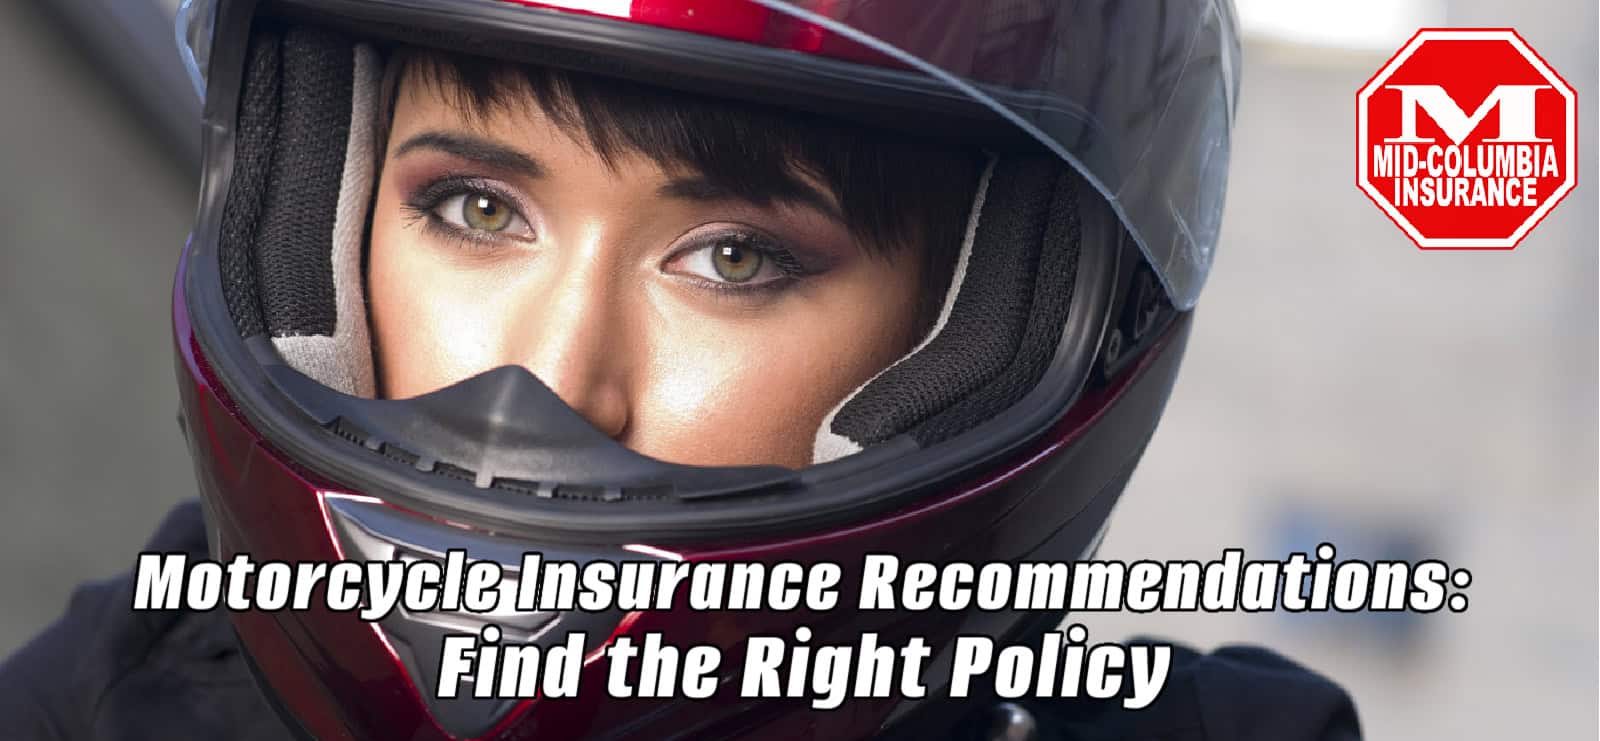 Motorcycle Insurance Recommendations Find The Right Policy. Girl on Motorcycle